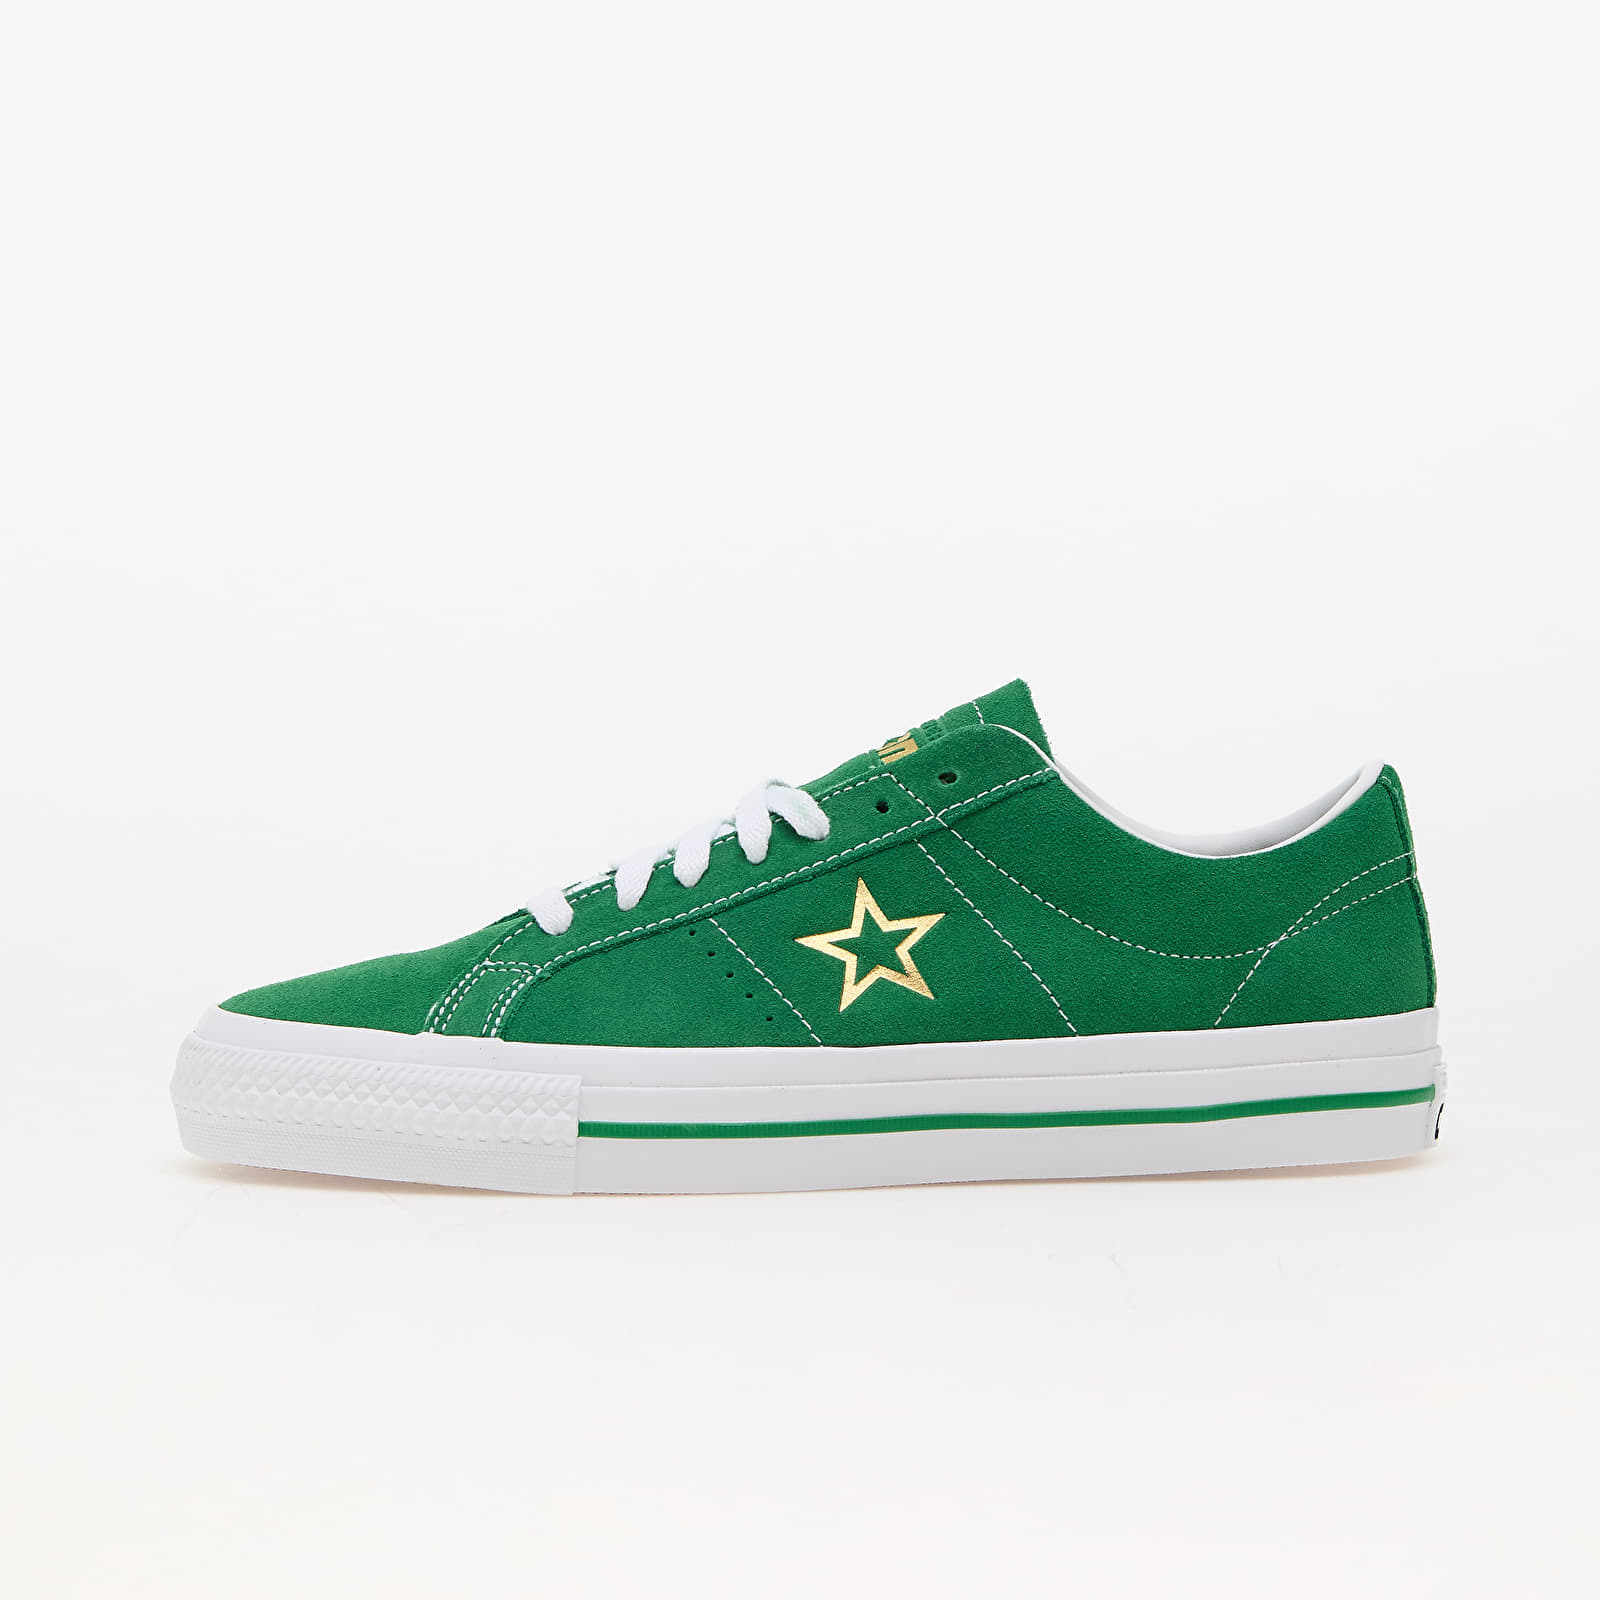 Converse One Star Pro Suede Green/ White/ Gold